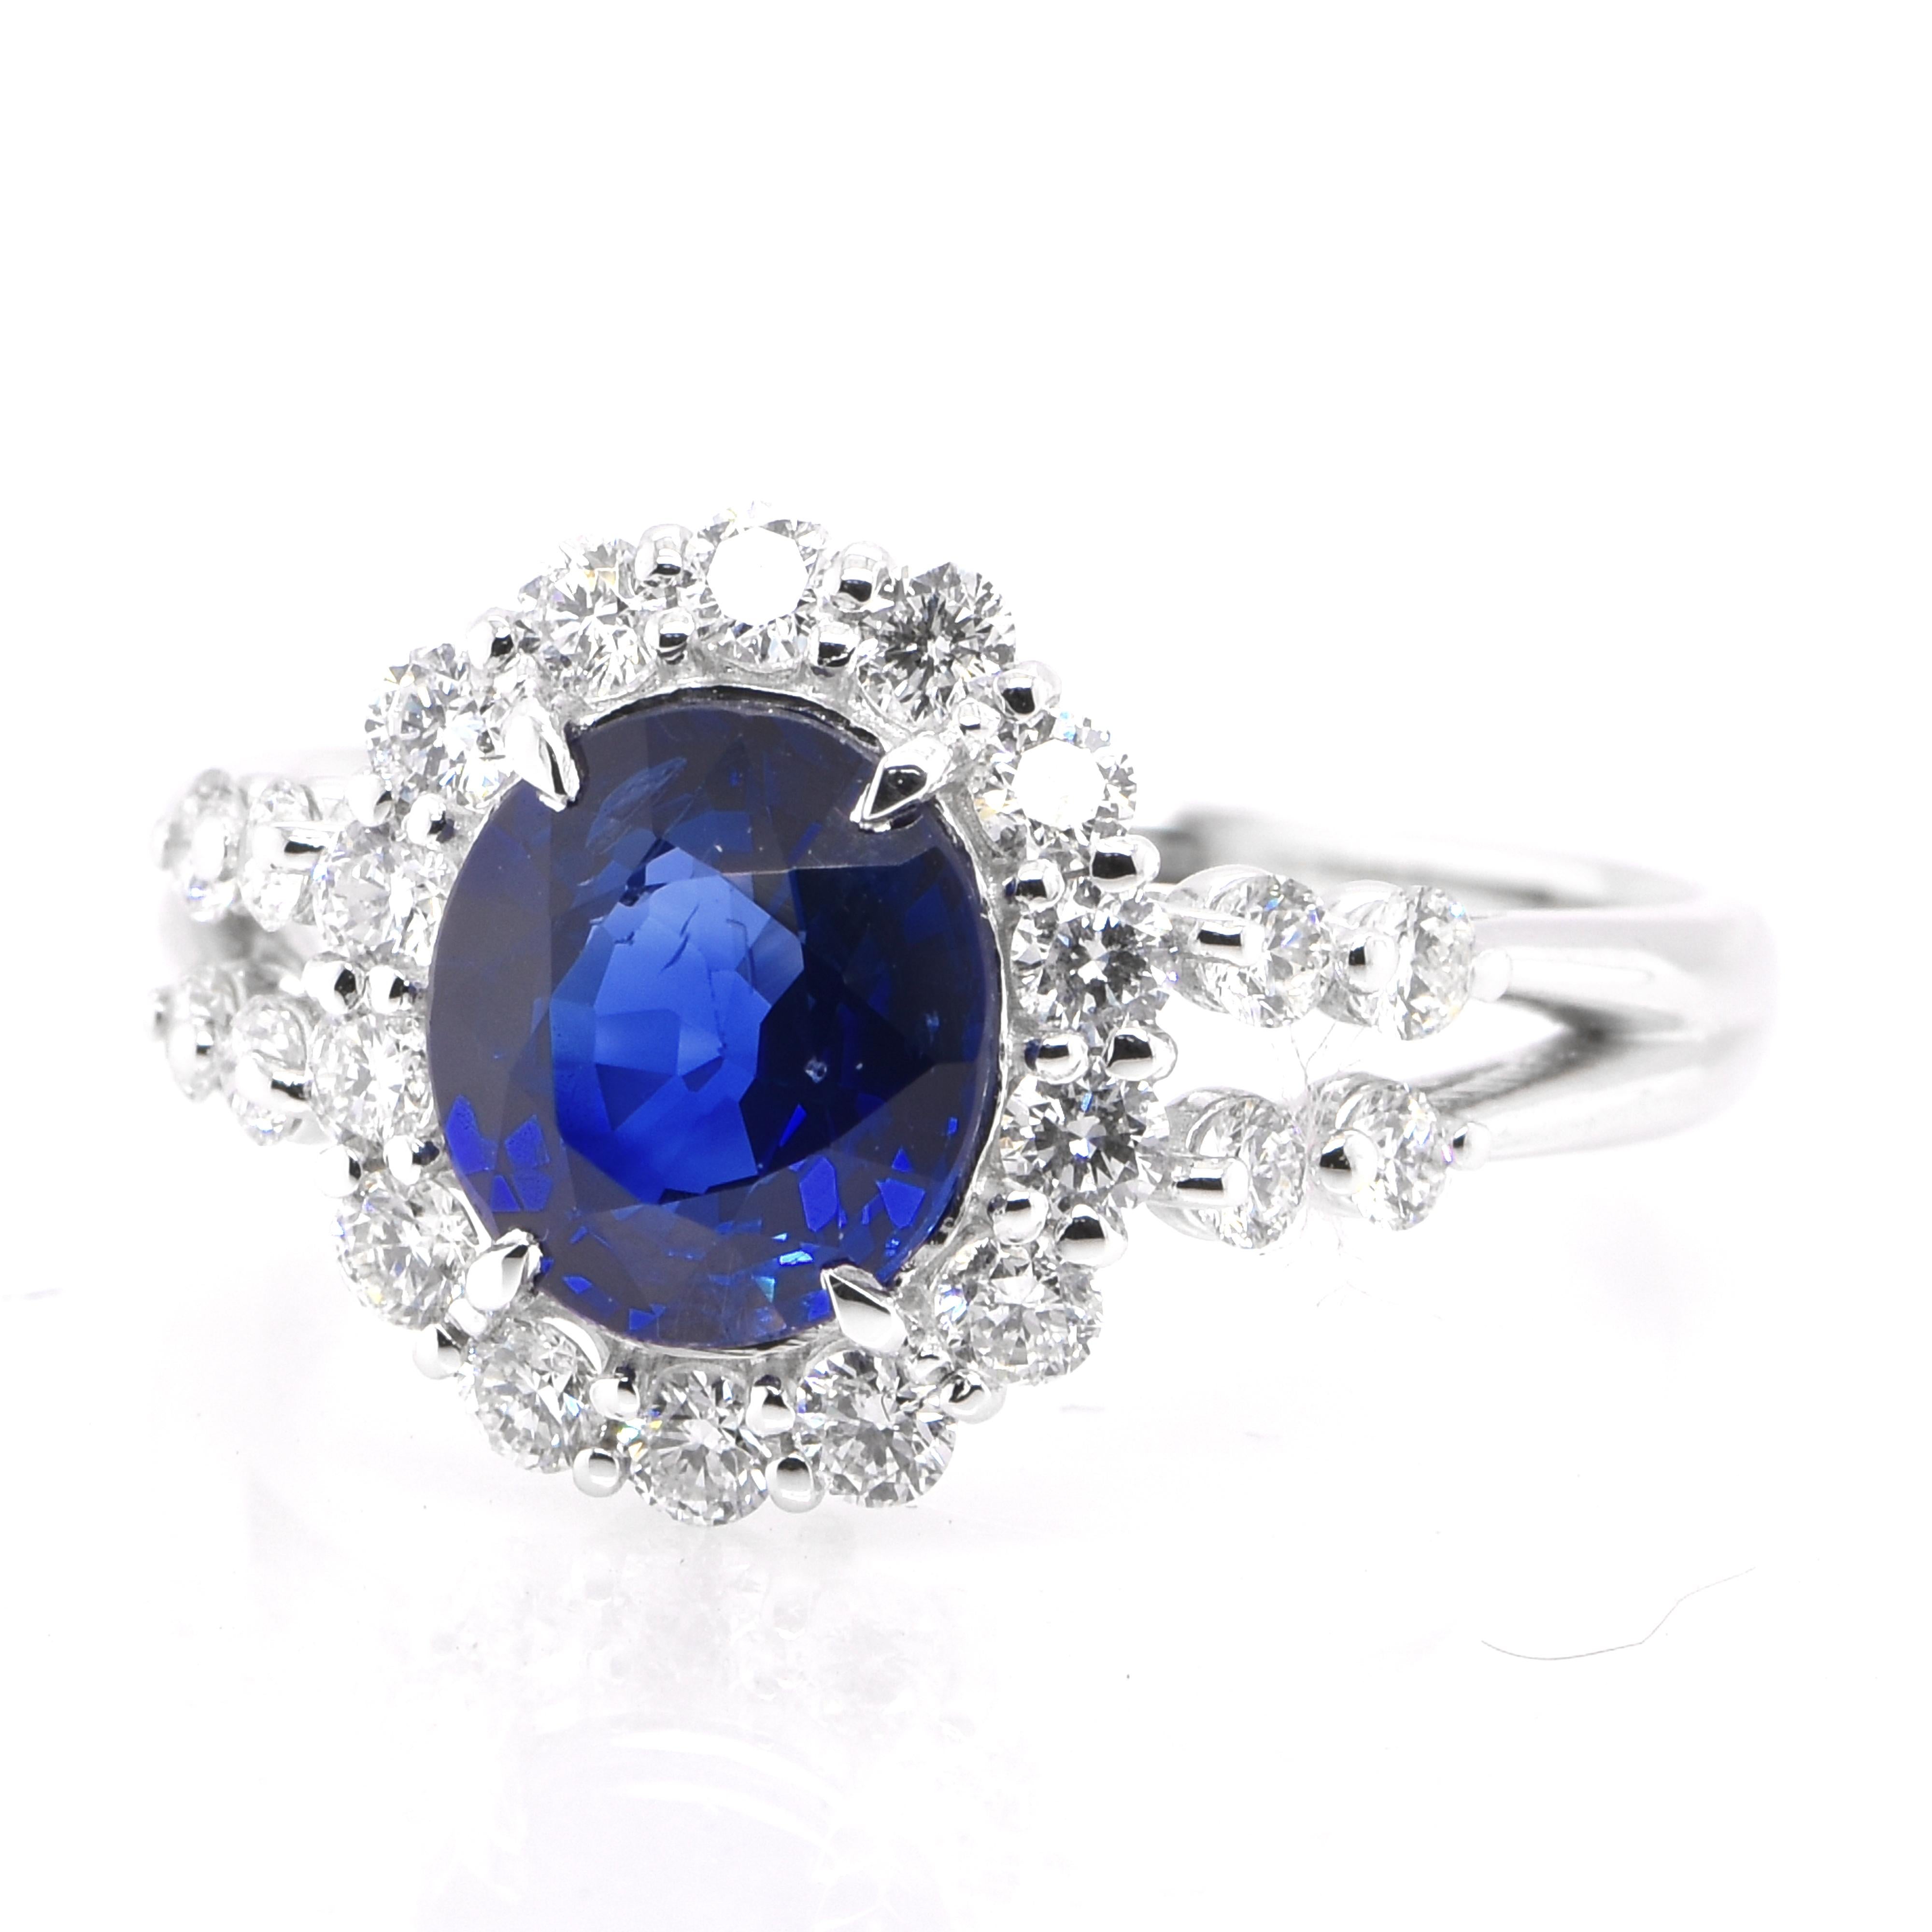 A beautiful ring featuring GIA Certified 1.77 Carat Natural Blue Sapphire from Madagascar and 0.59 Carats Diamond Accents set in Platinum. Sapphires have extraordinary durability - they excel in hardness as well as toughness and durability making